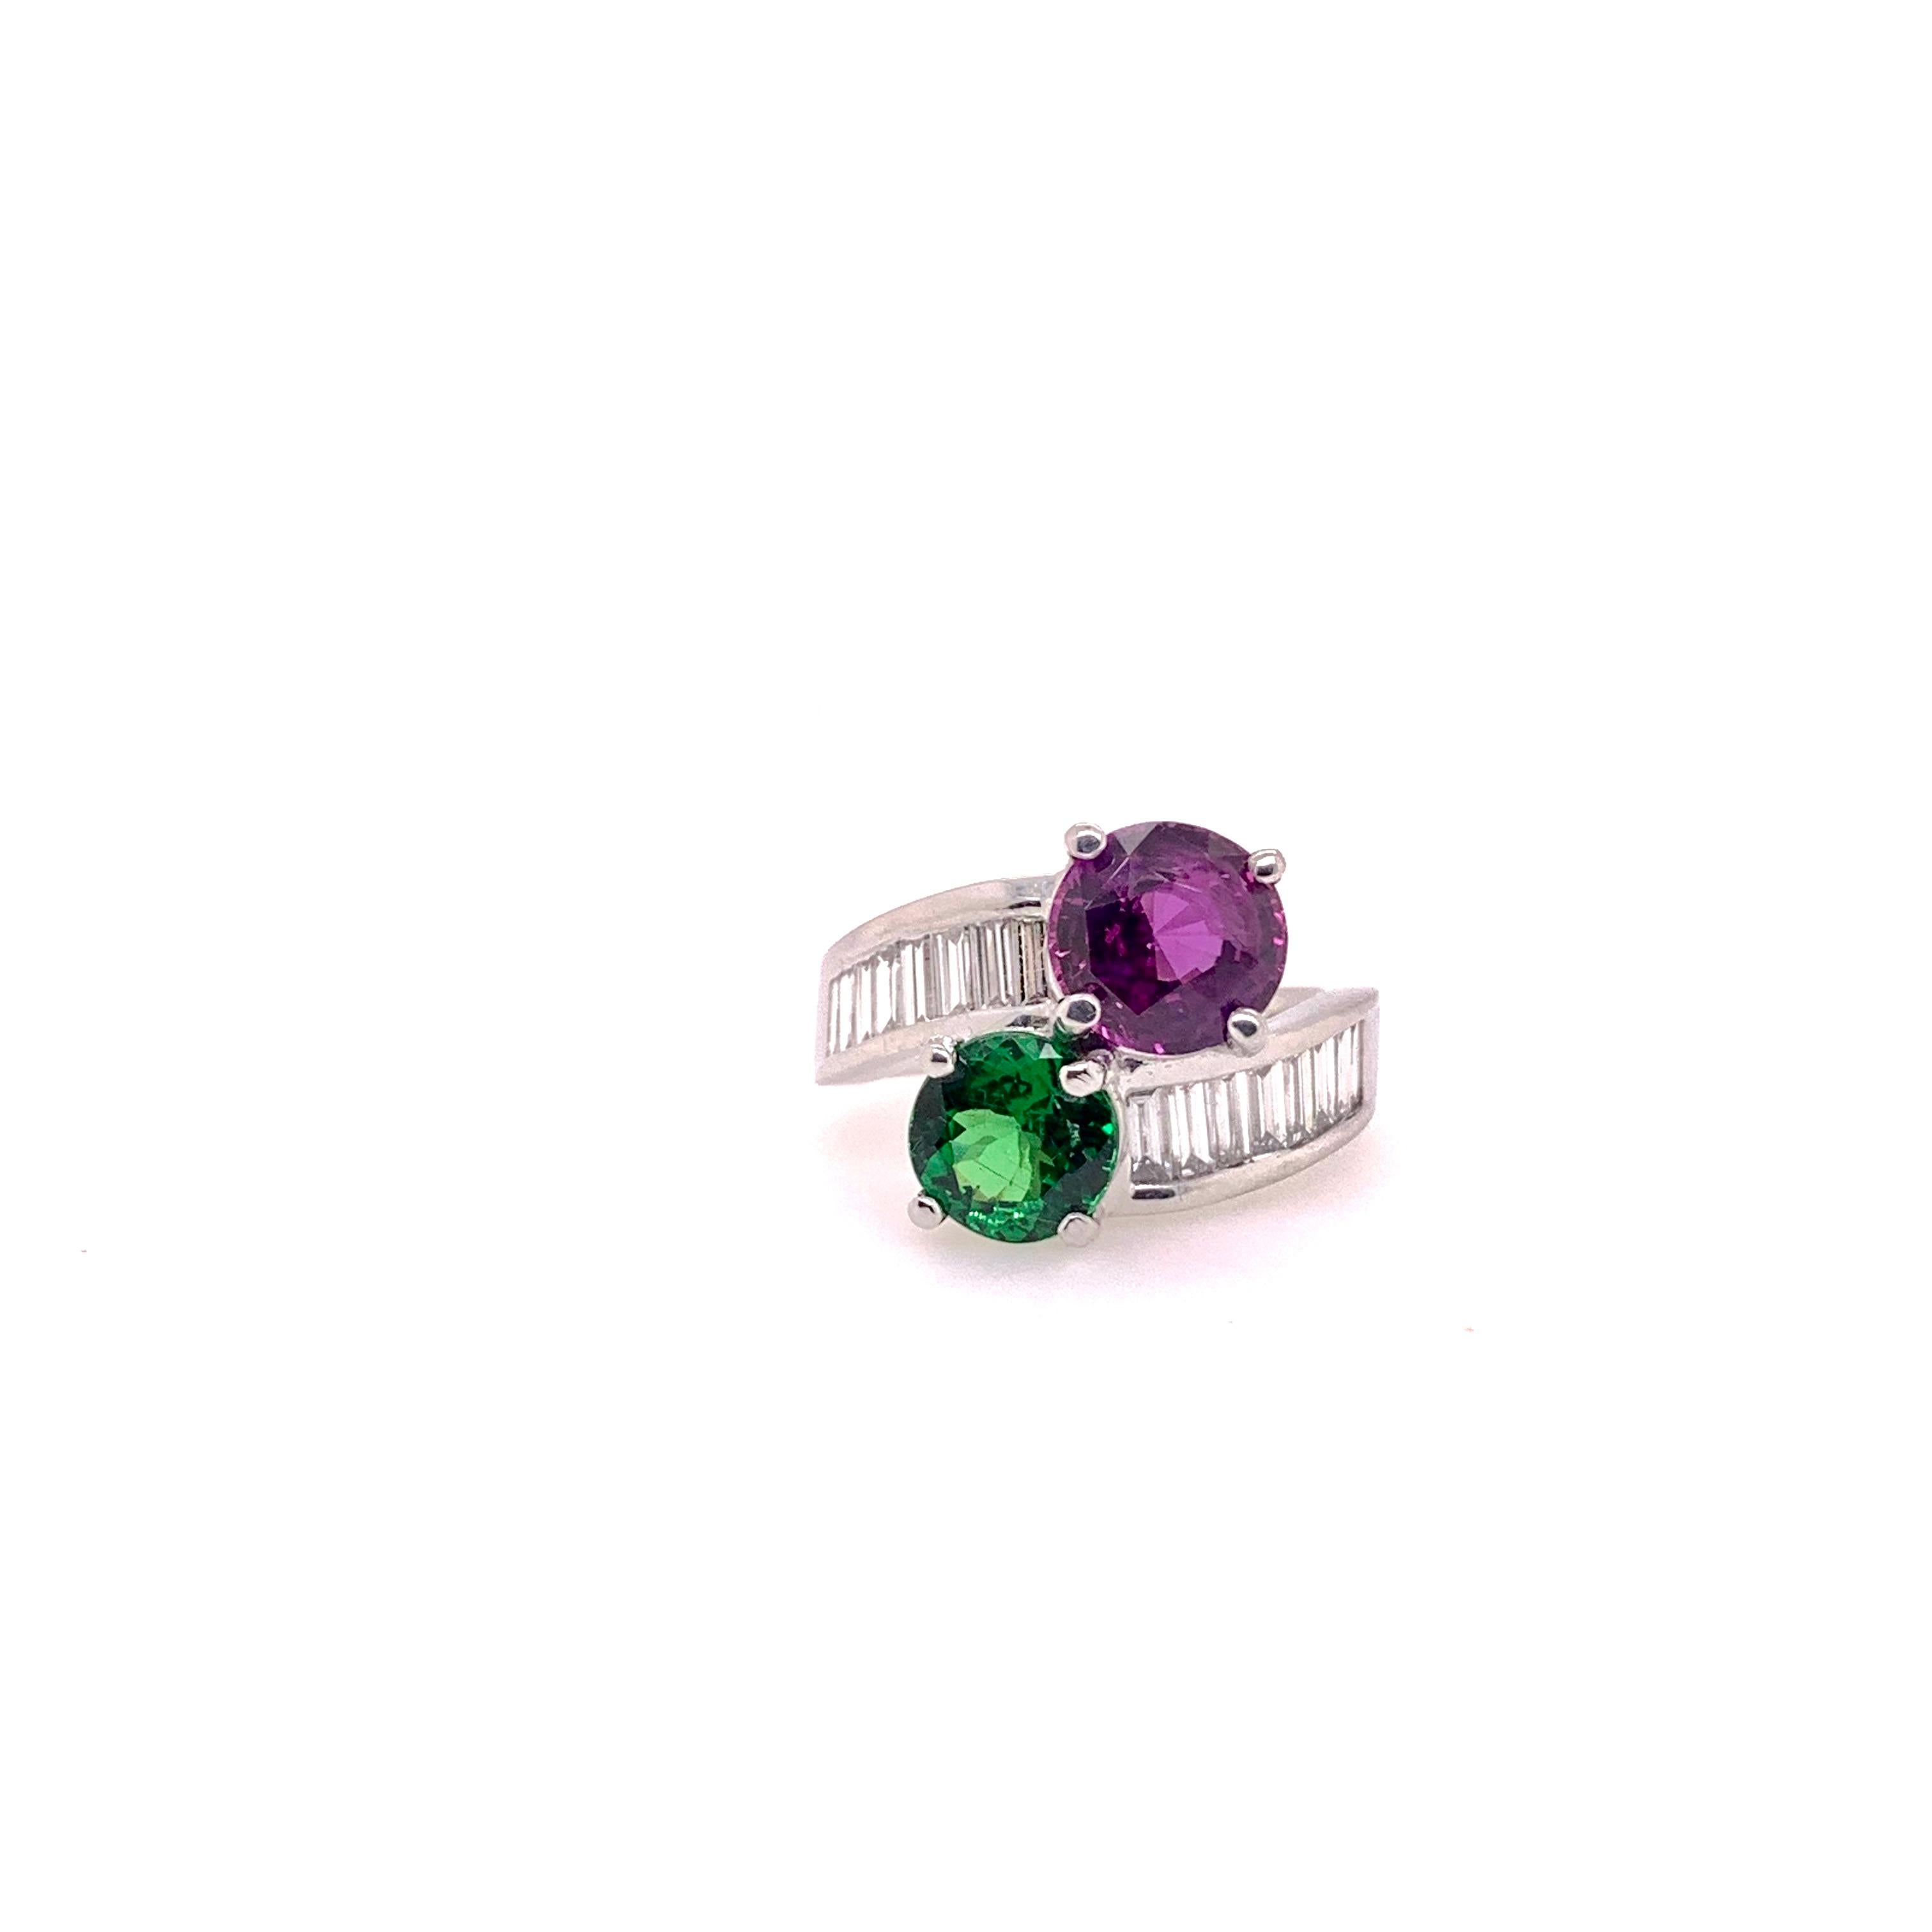 Amazing colorstone bypass ring!   A gorgeous, kelly-green tsavorite garnet opposed by a GIA certified purple-pink sapphire in a handmade 18k white gold diamond setting.  The round cut tsavorite weights 1.62 cts and the round cut sapphire is a